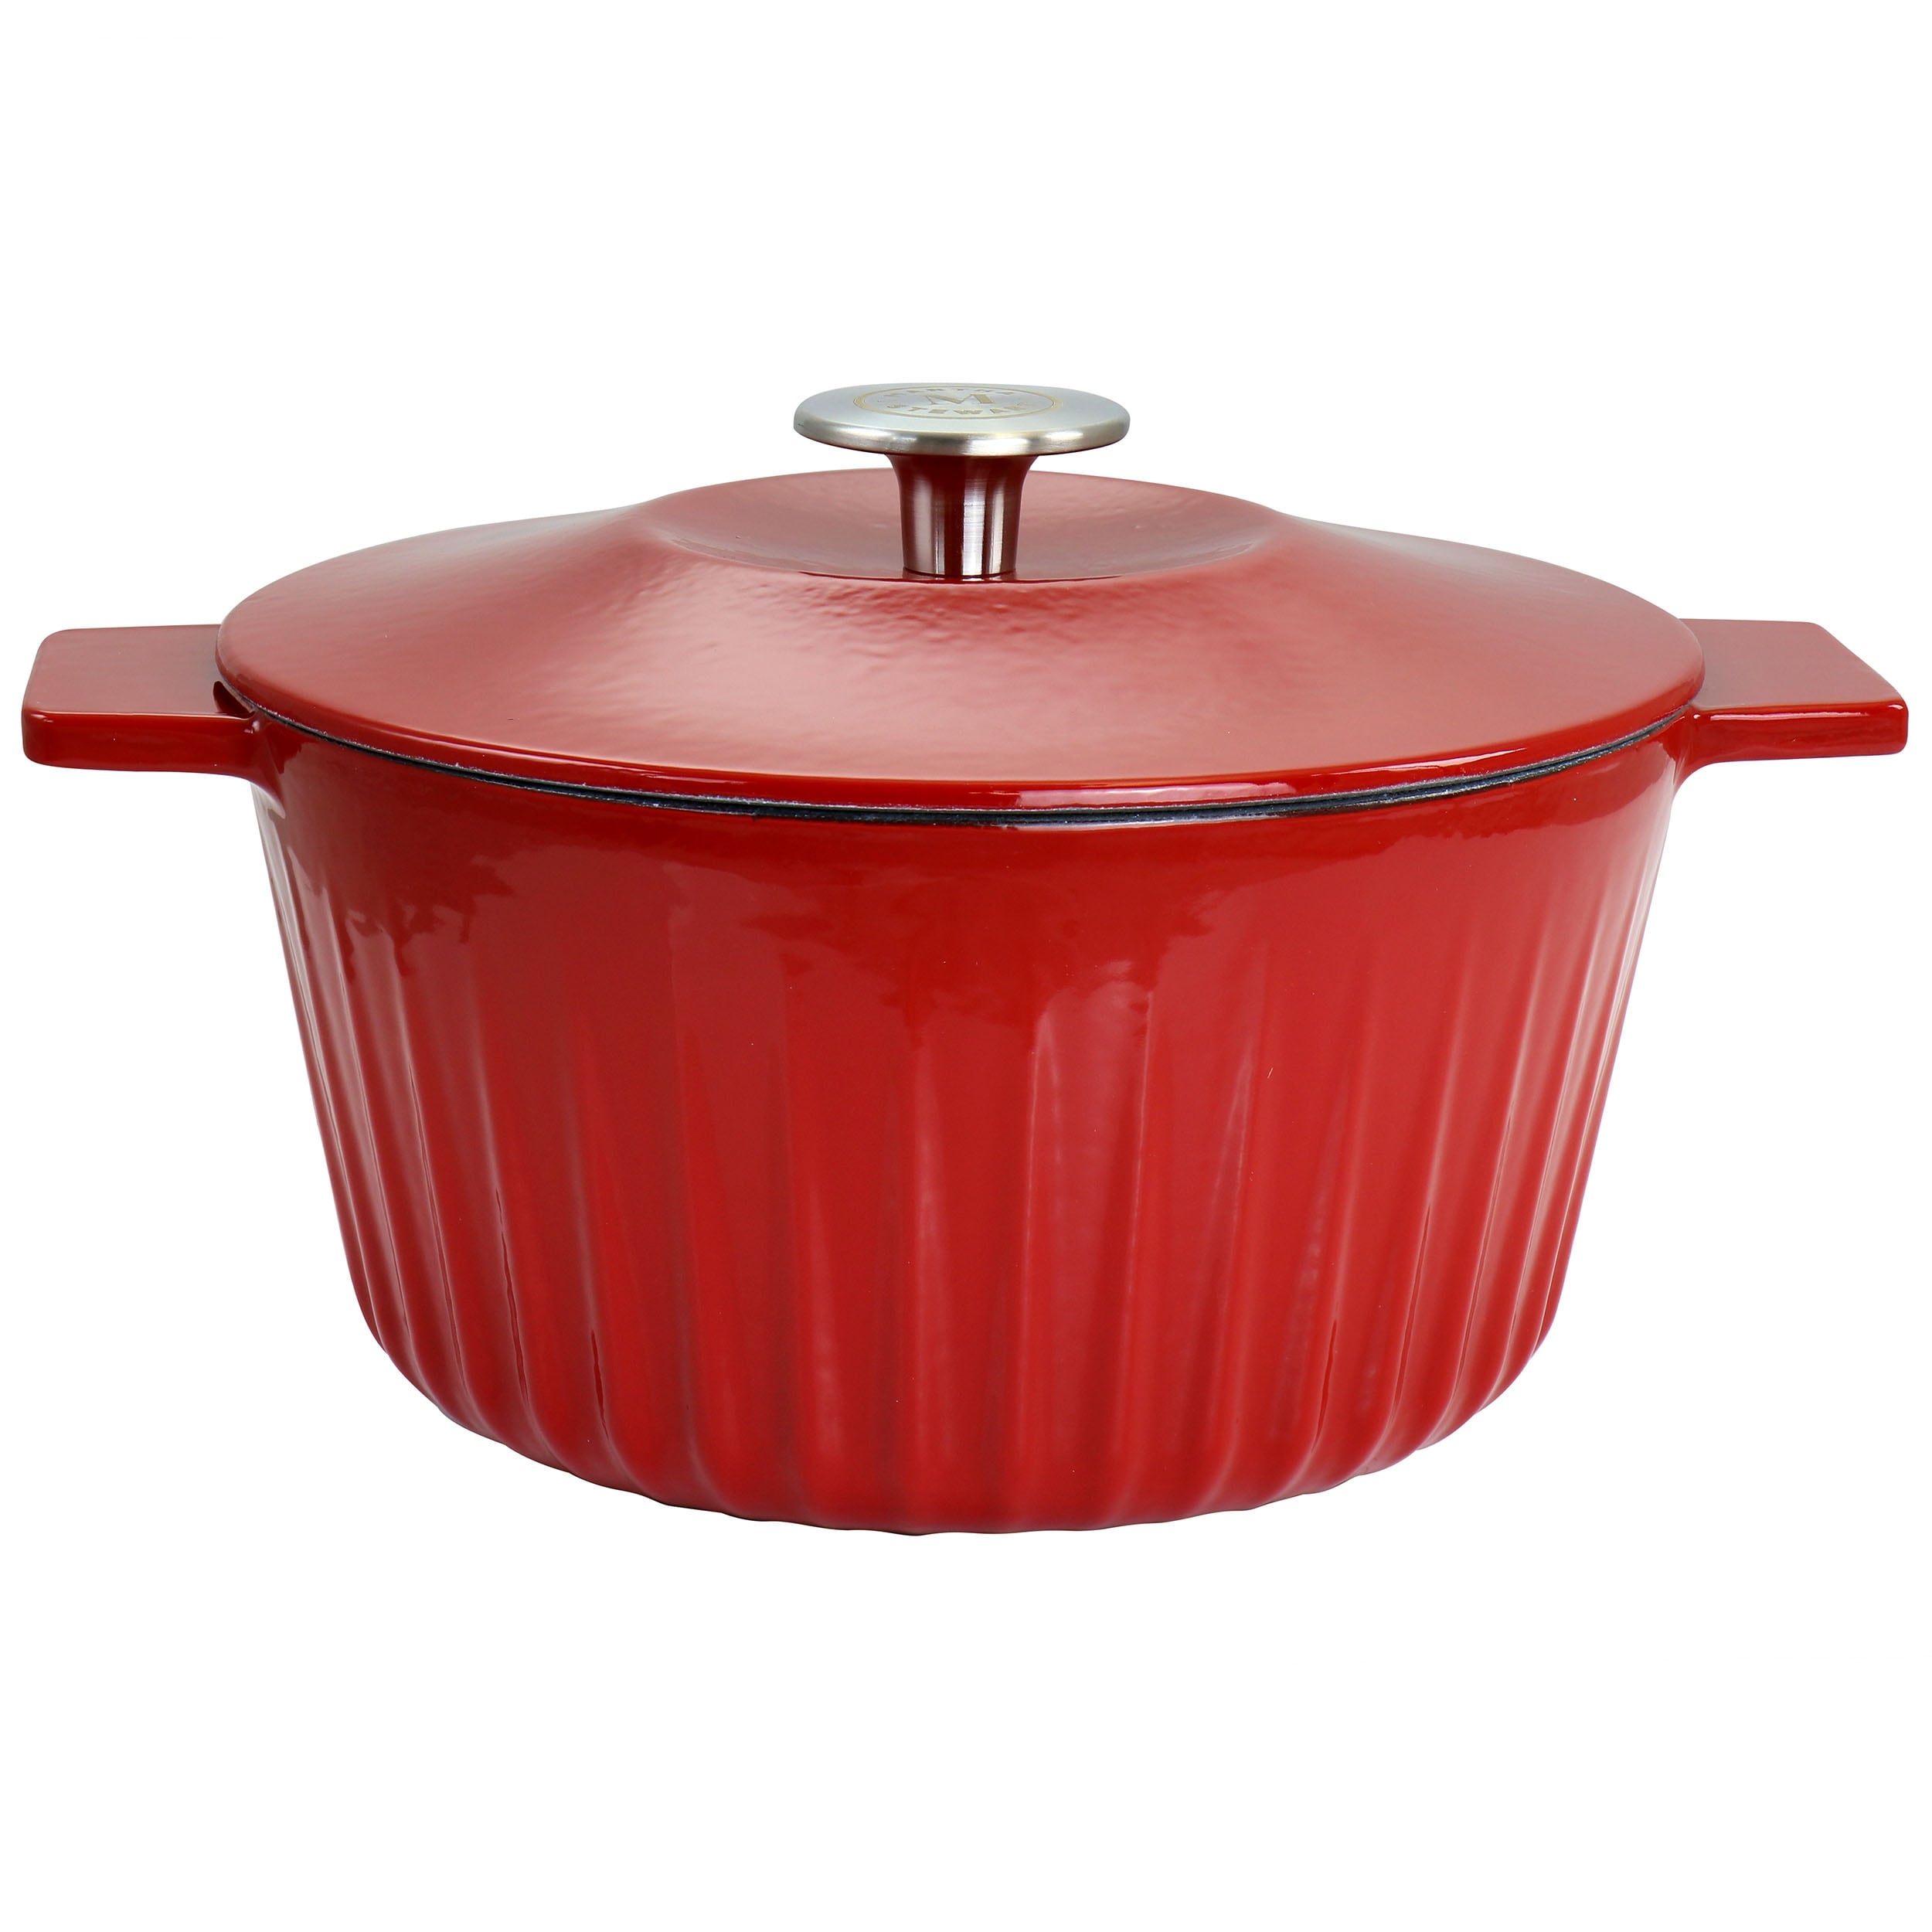 https://ak1.ostkcdn.com/images/products/is/images/direct/a6505349f6d346be2ad4d01a4a488557fccf49ef/Martha-Stewart-5qt-Enameled-Cast-Iron-Round-Dutch-Oven-in-Red.jpg